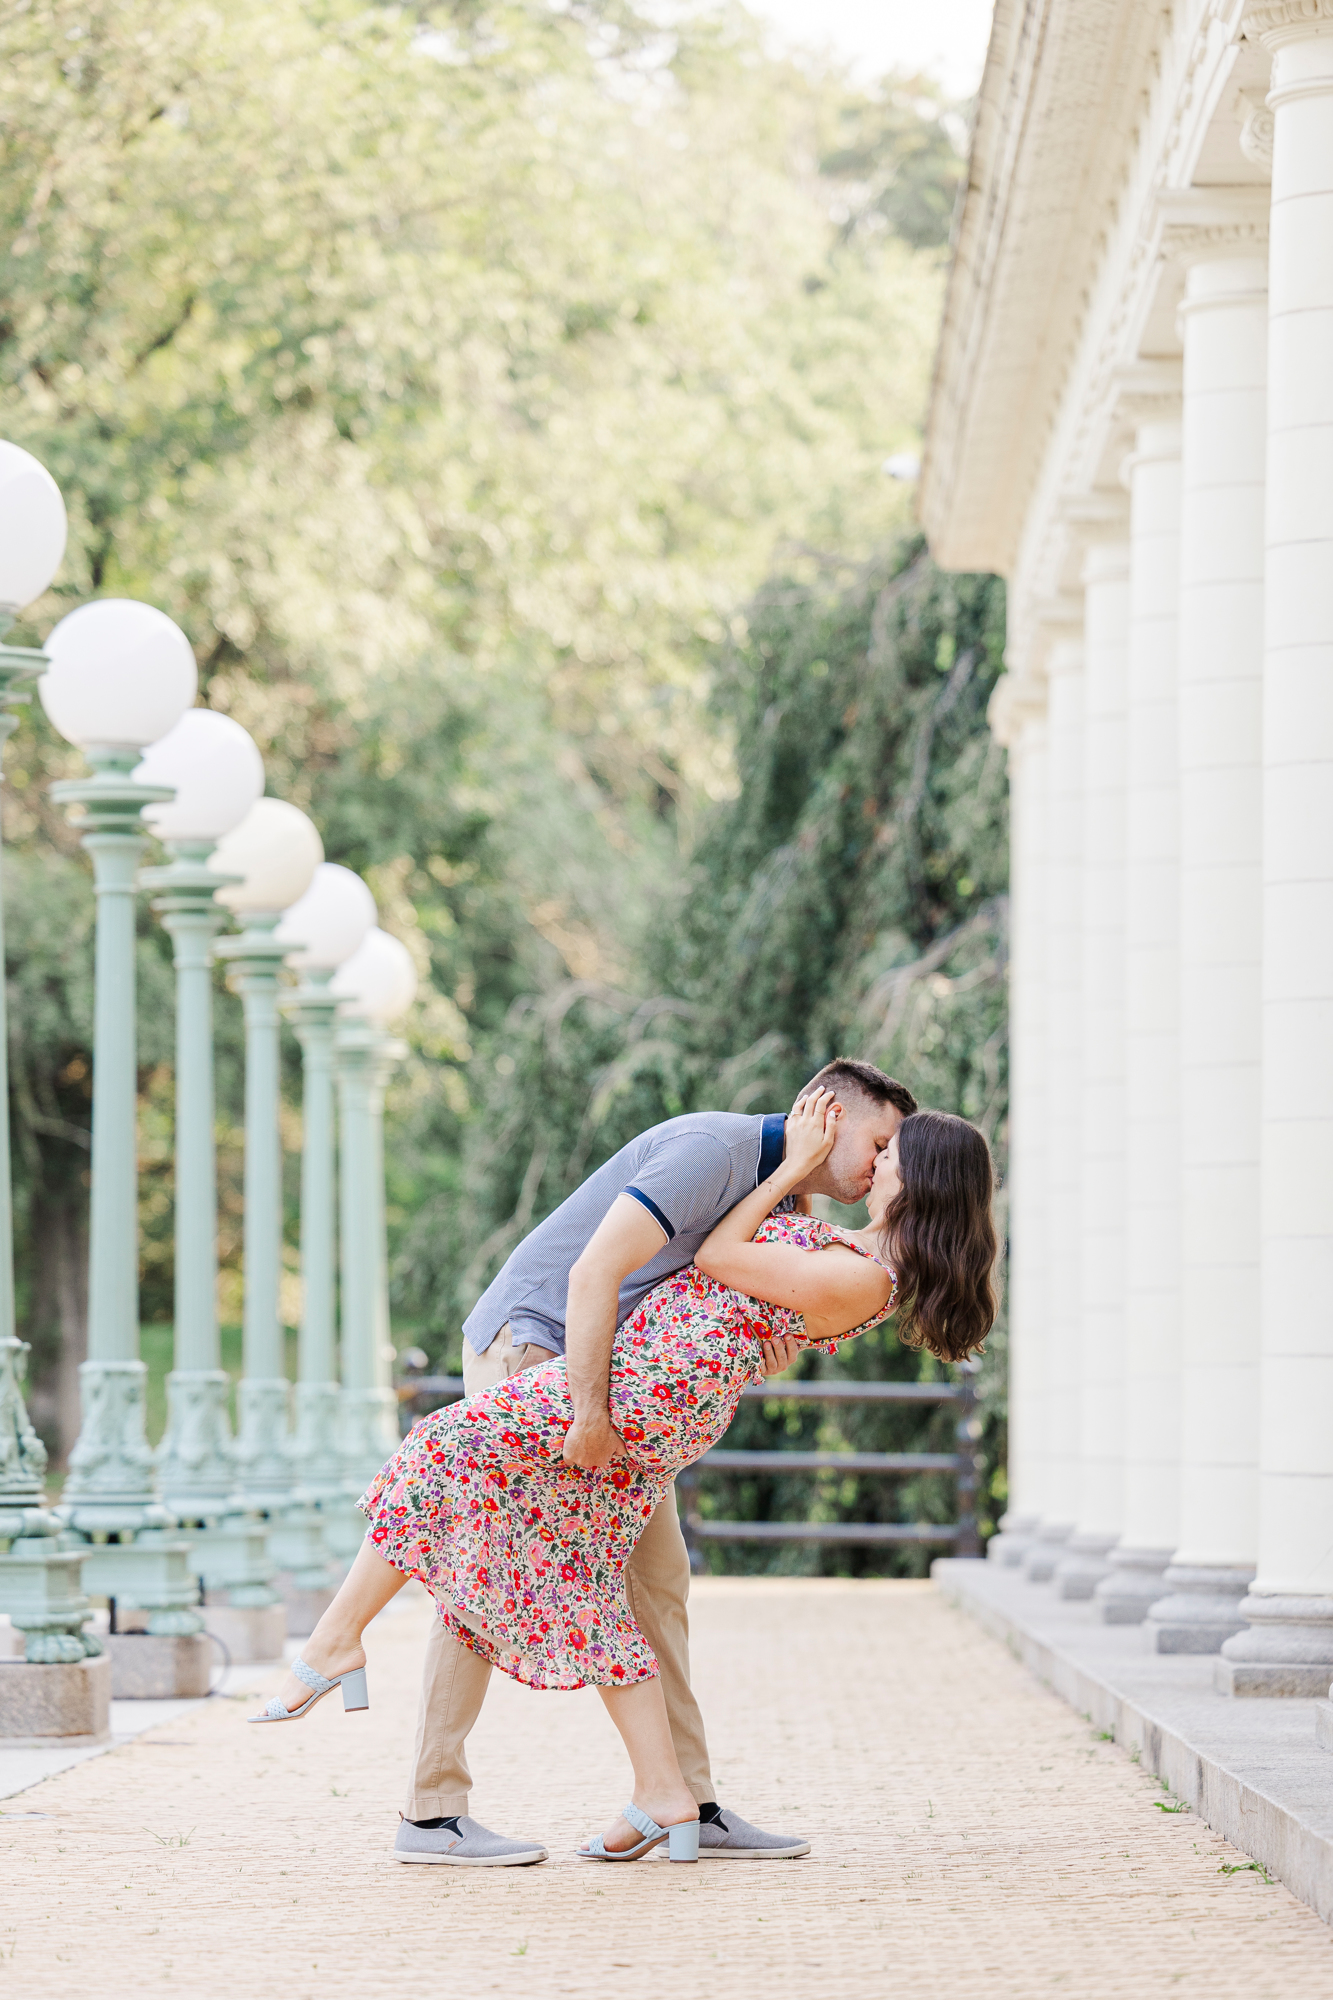 Personal engagement session in Prospect Park